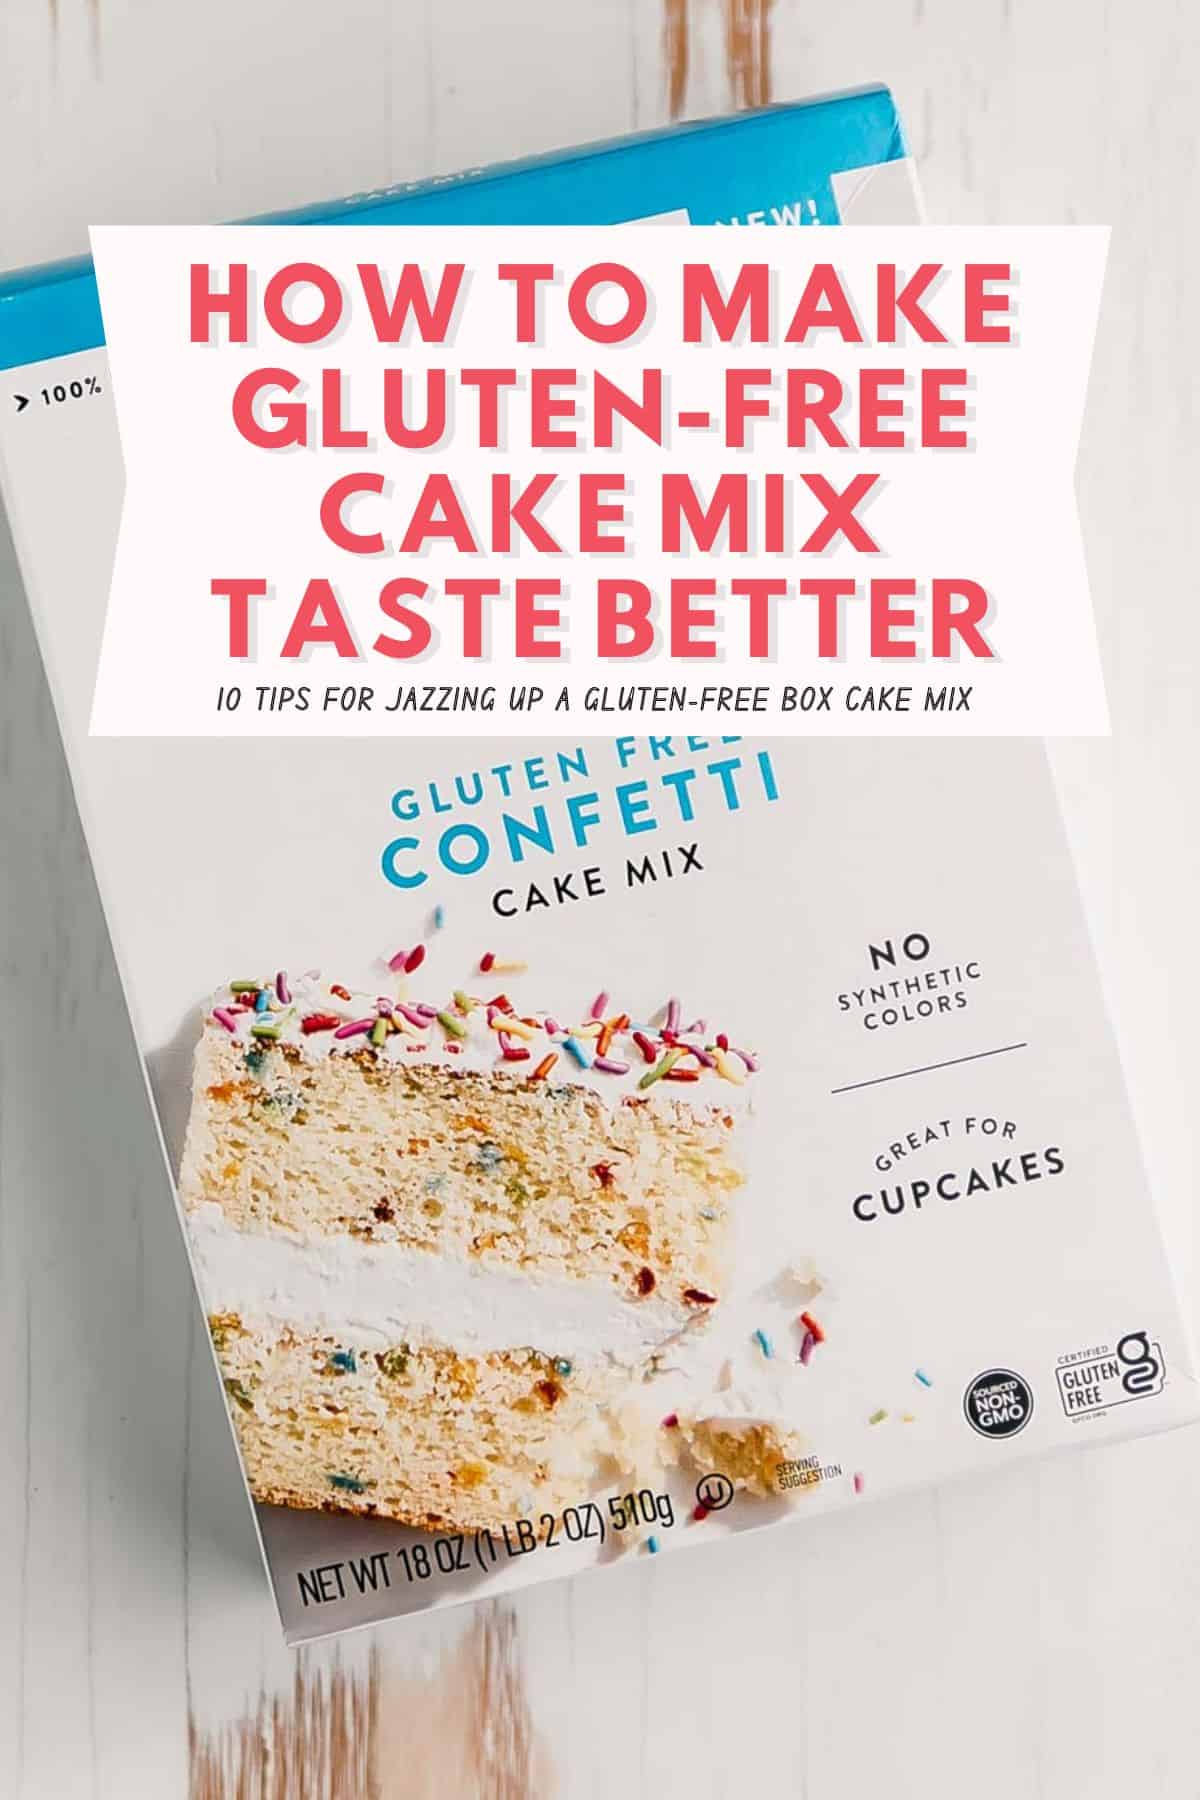 A box of gluten free confetti cake mix on white surface, text overlay, "how to make gluten-free cake mix taste better"